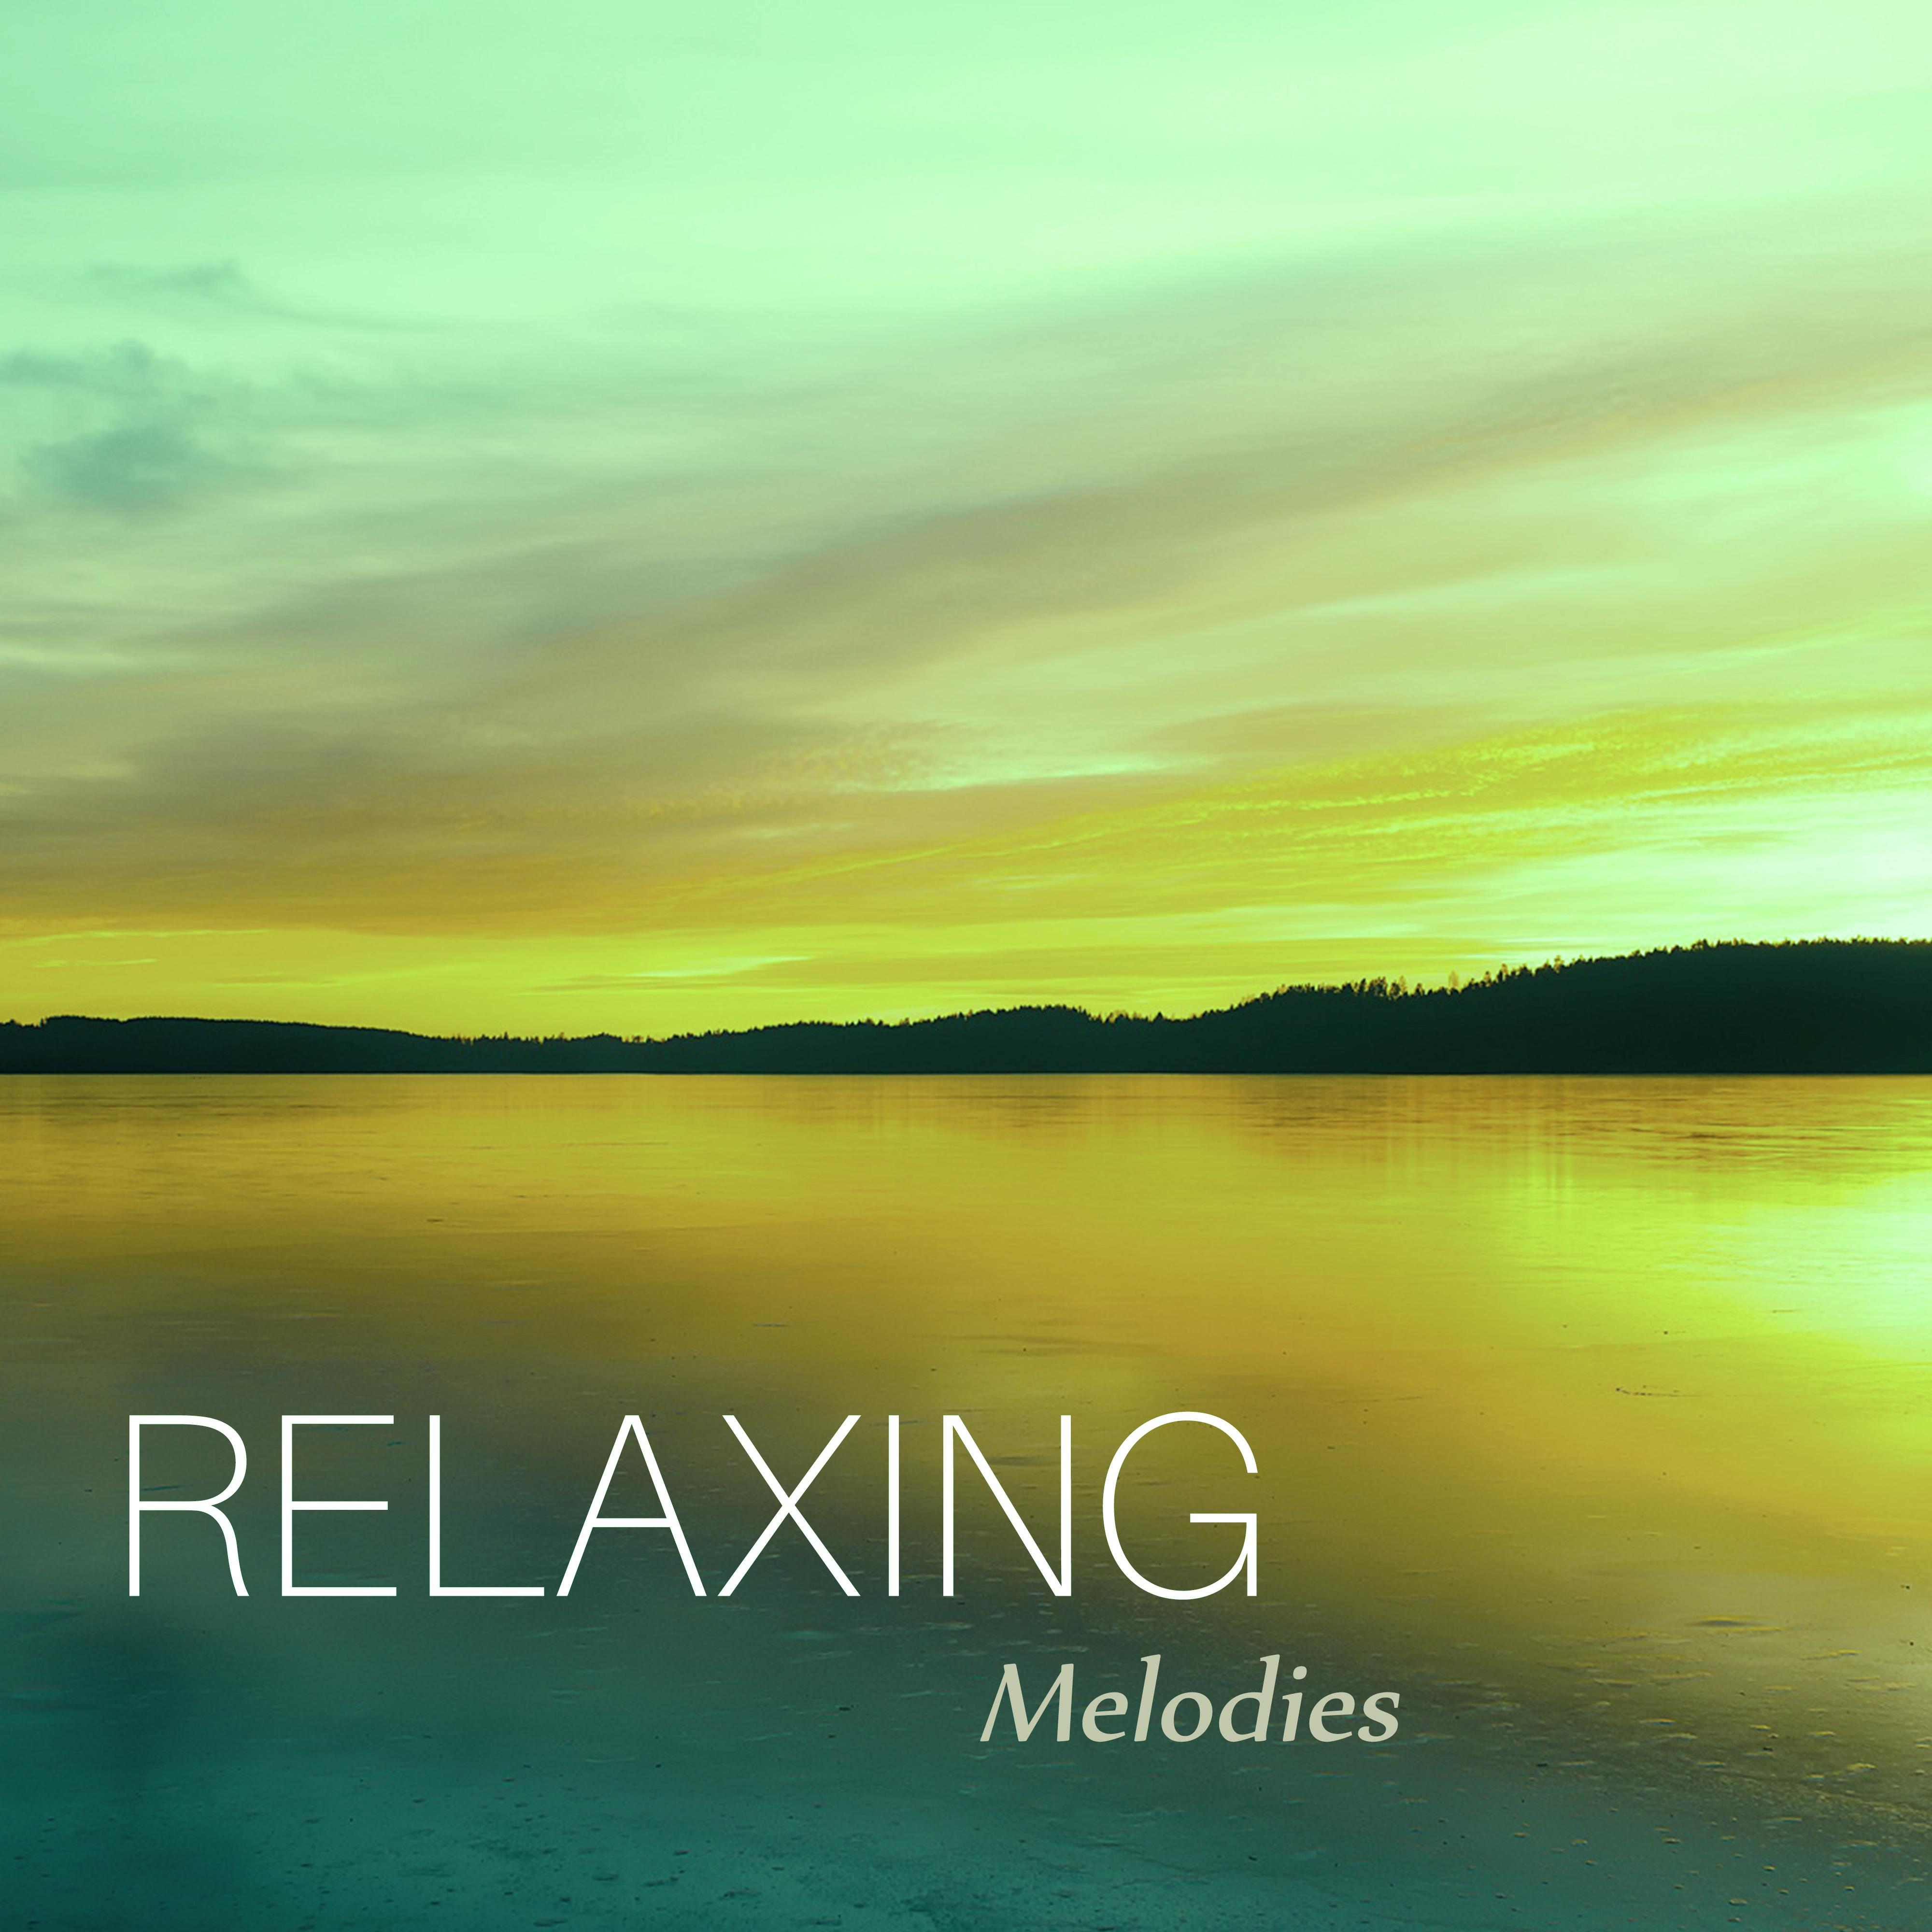 Relaxing Melodies – Inner Peace, Stress Free, New Age Music to Calm Down, Peaceful Sounds